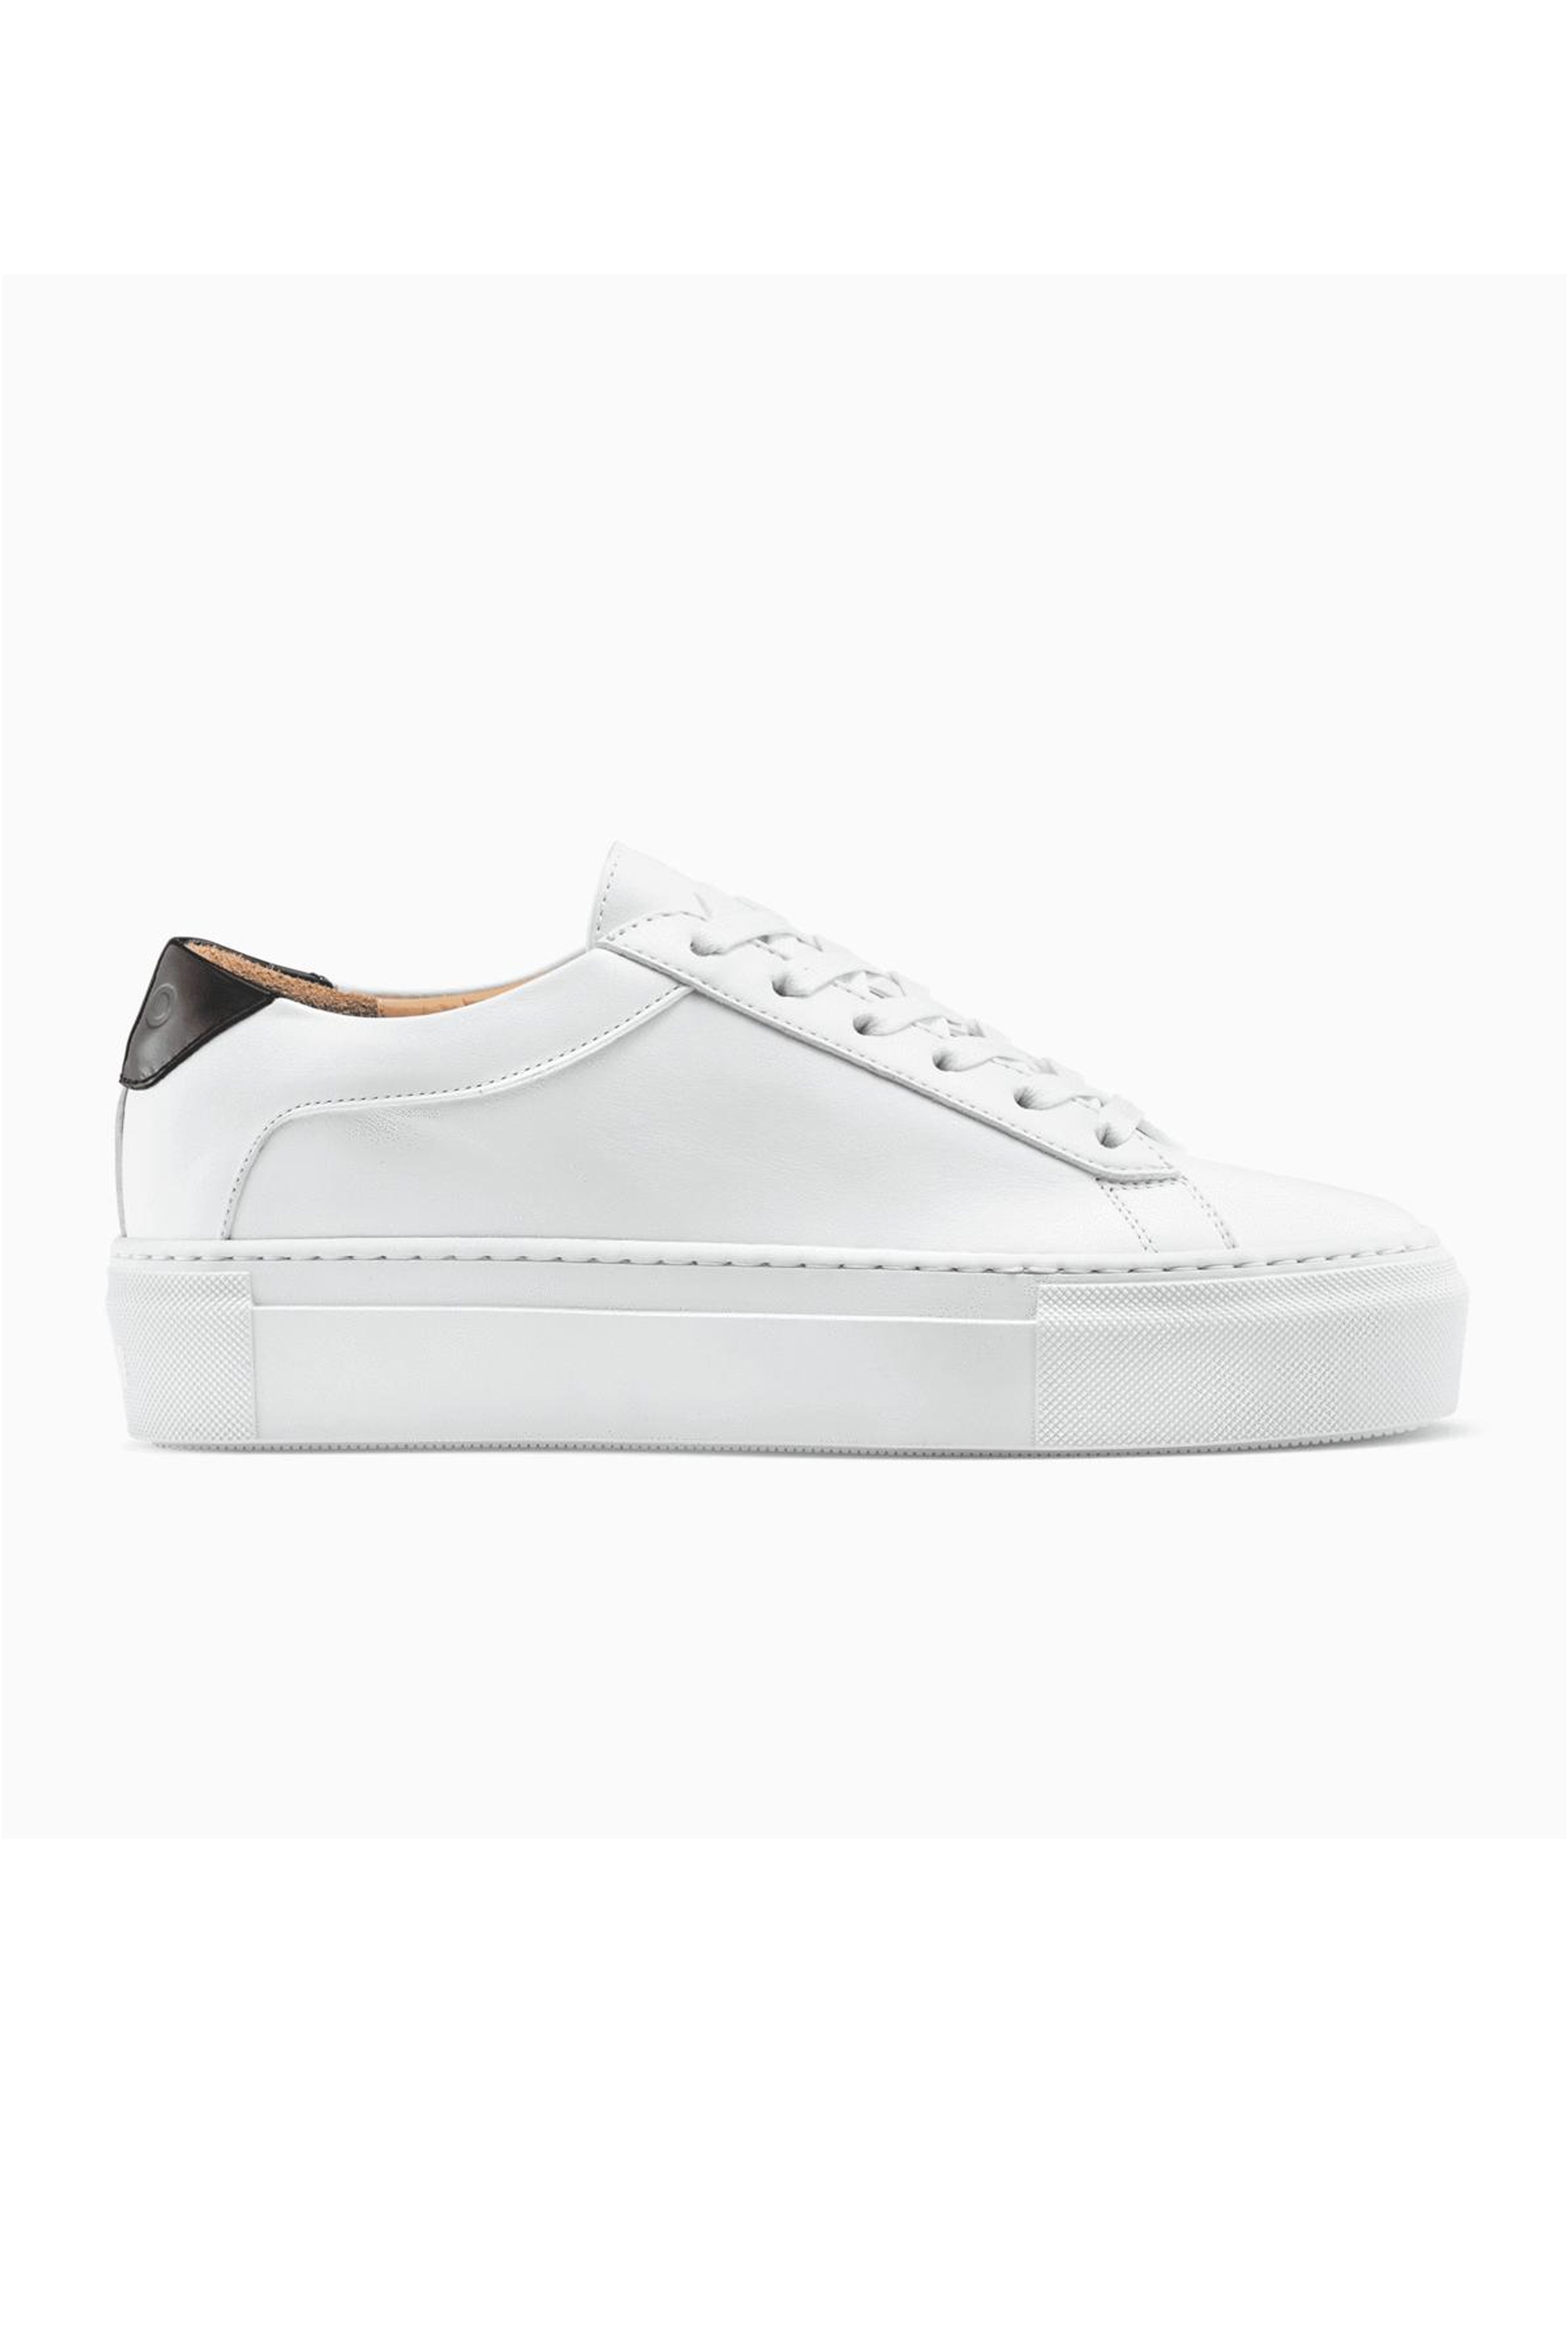 best white tennis shoes womens